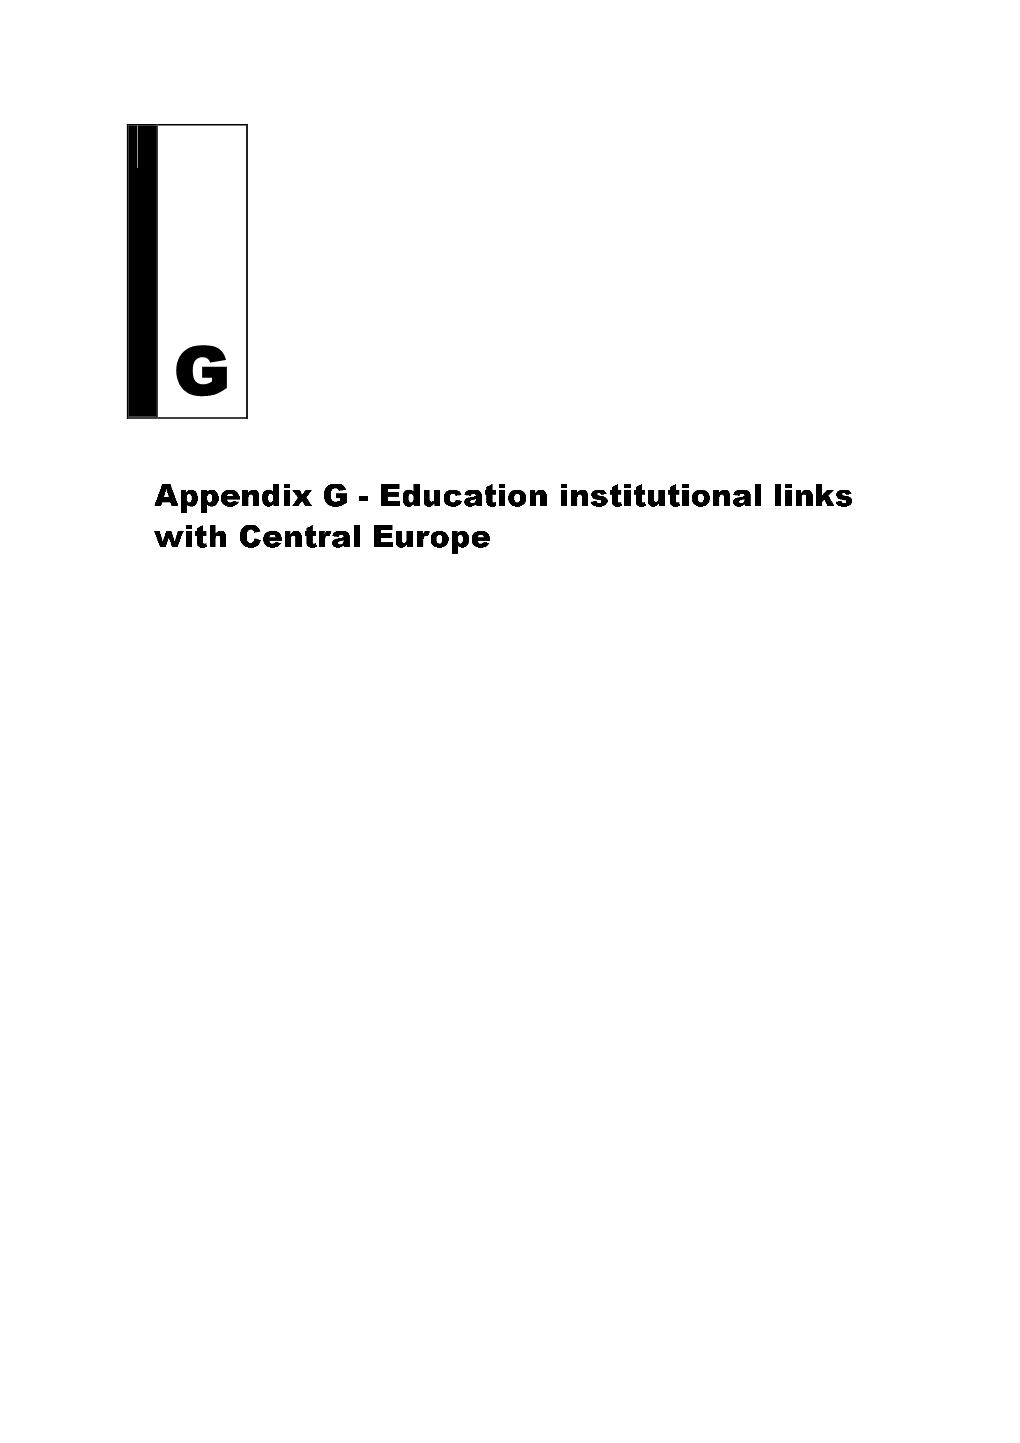 Appendix G: Education Institutional Links with Central Europe